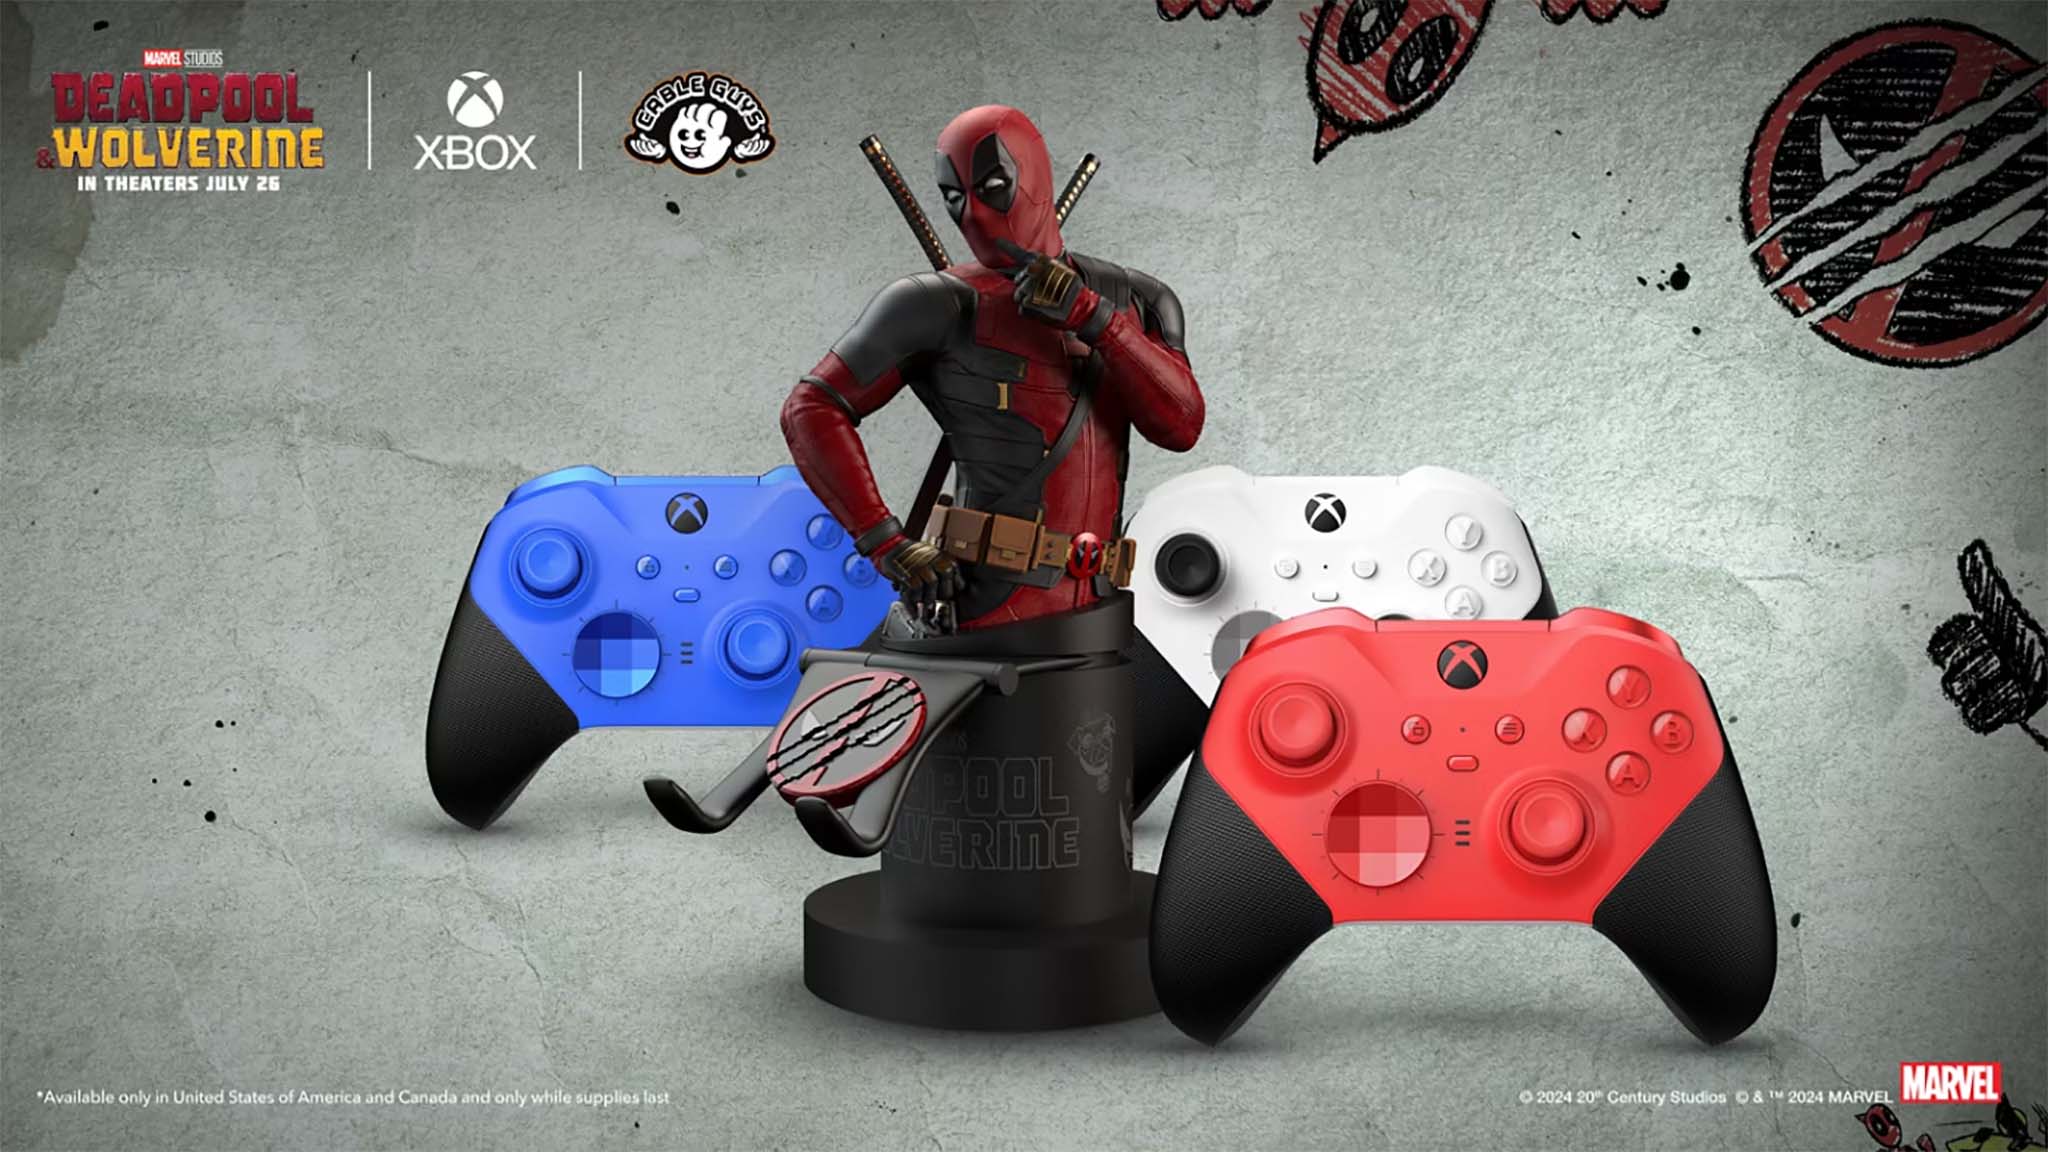 Deadpool and Wolverine Xbox Elite Core Wireless Controller and Holder.